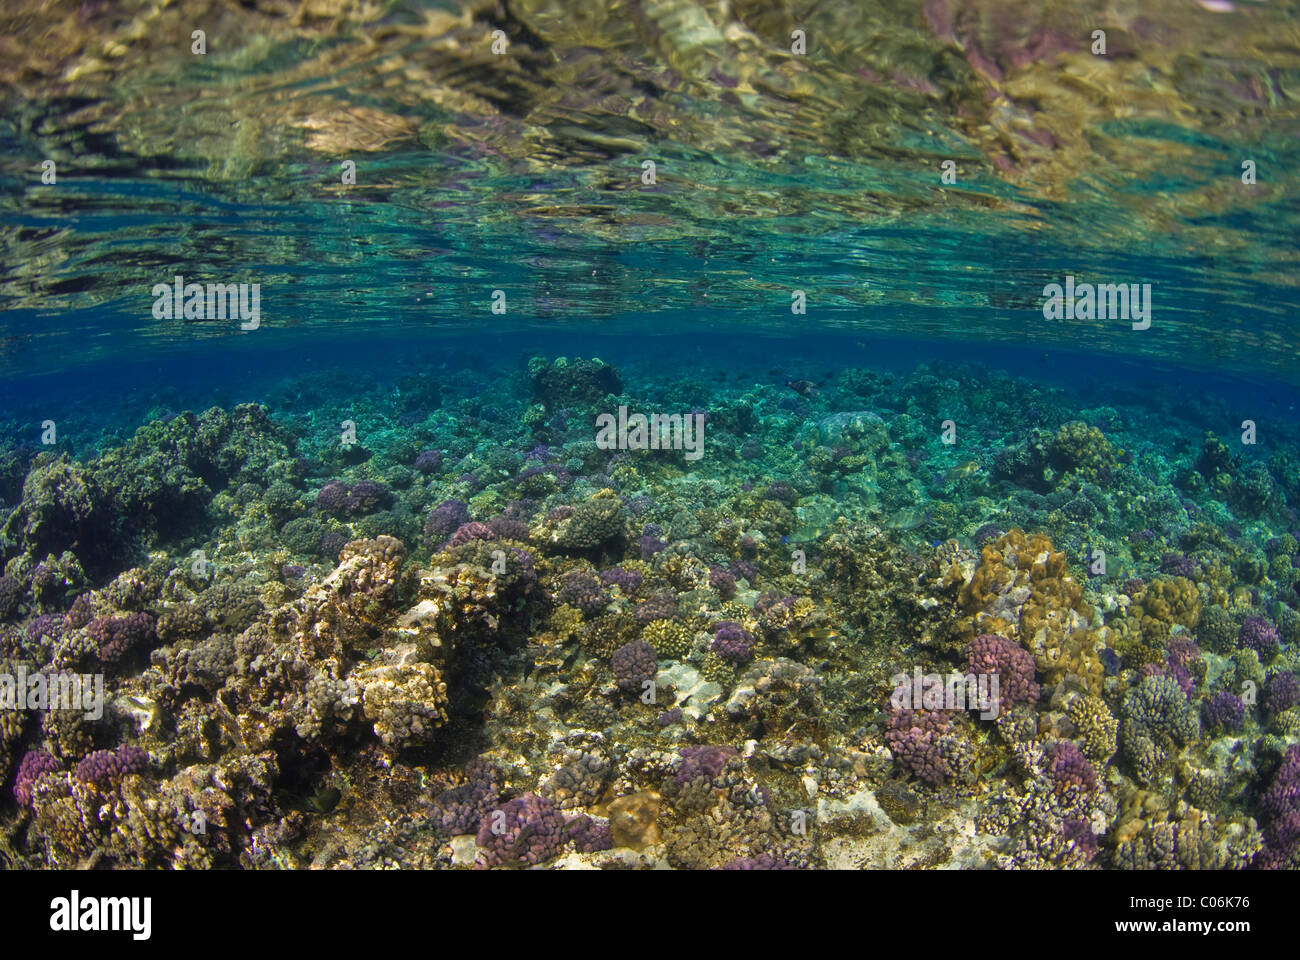 Reef scenic with hard corals near the surface, Red Sea, Sudan Stock Photo